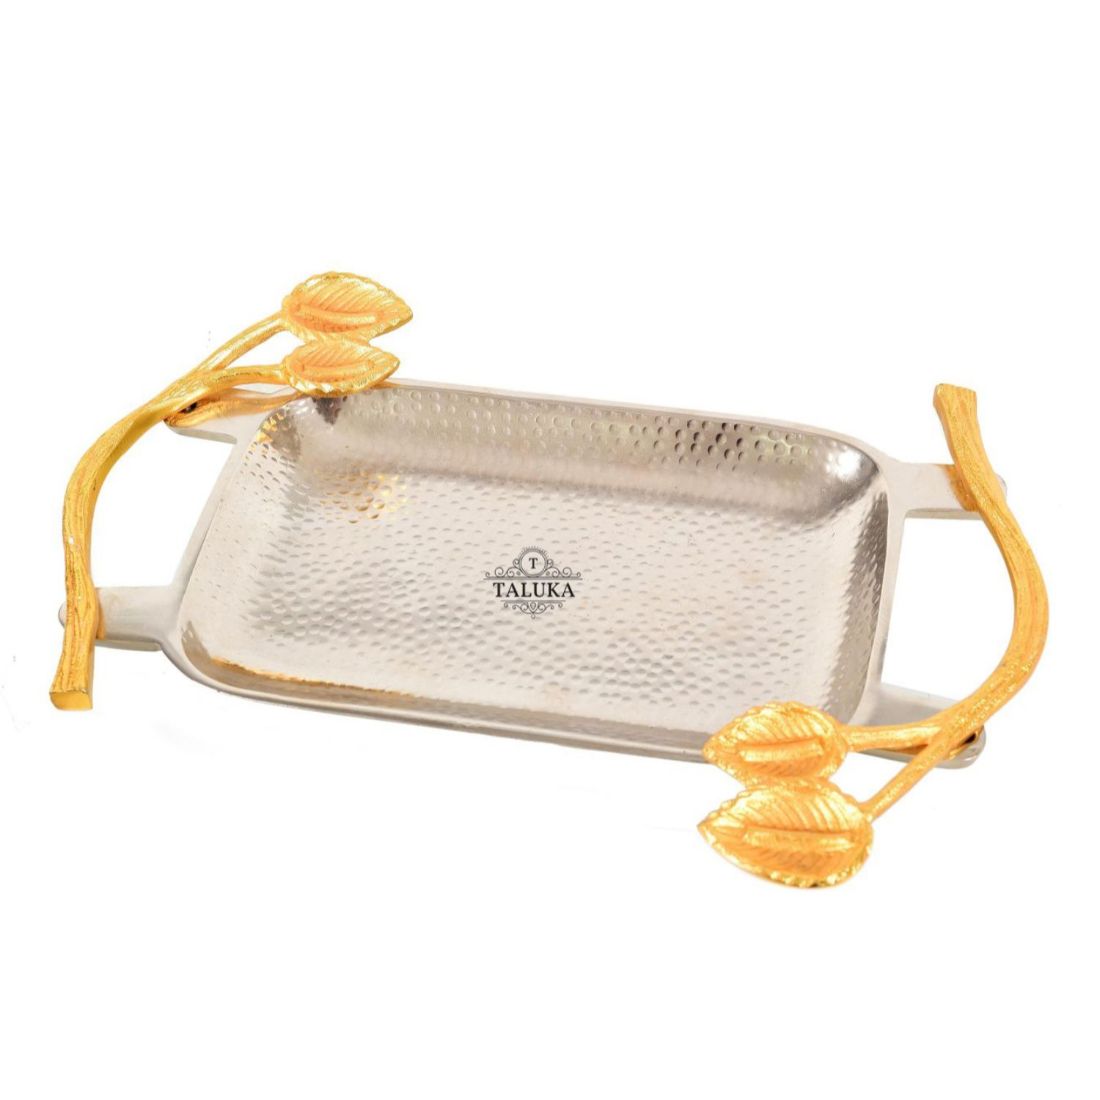 Premium Stainless Steel with Brass Handel Hammered Tray Tableware for Serving Use in Home Hotel Restaurant